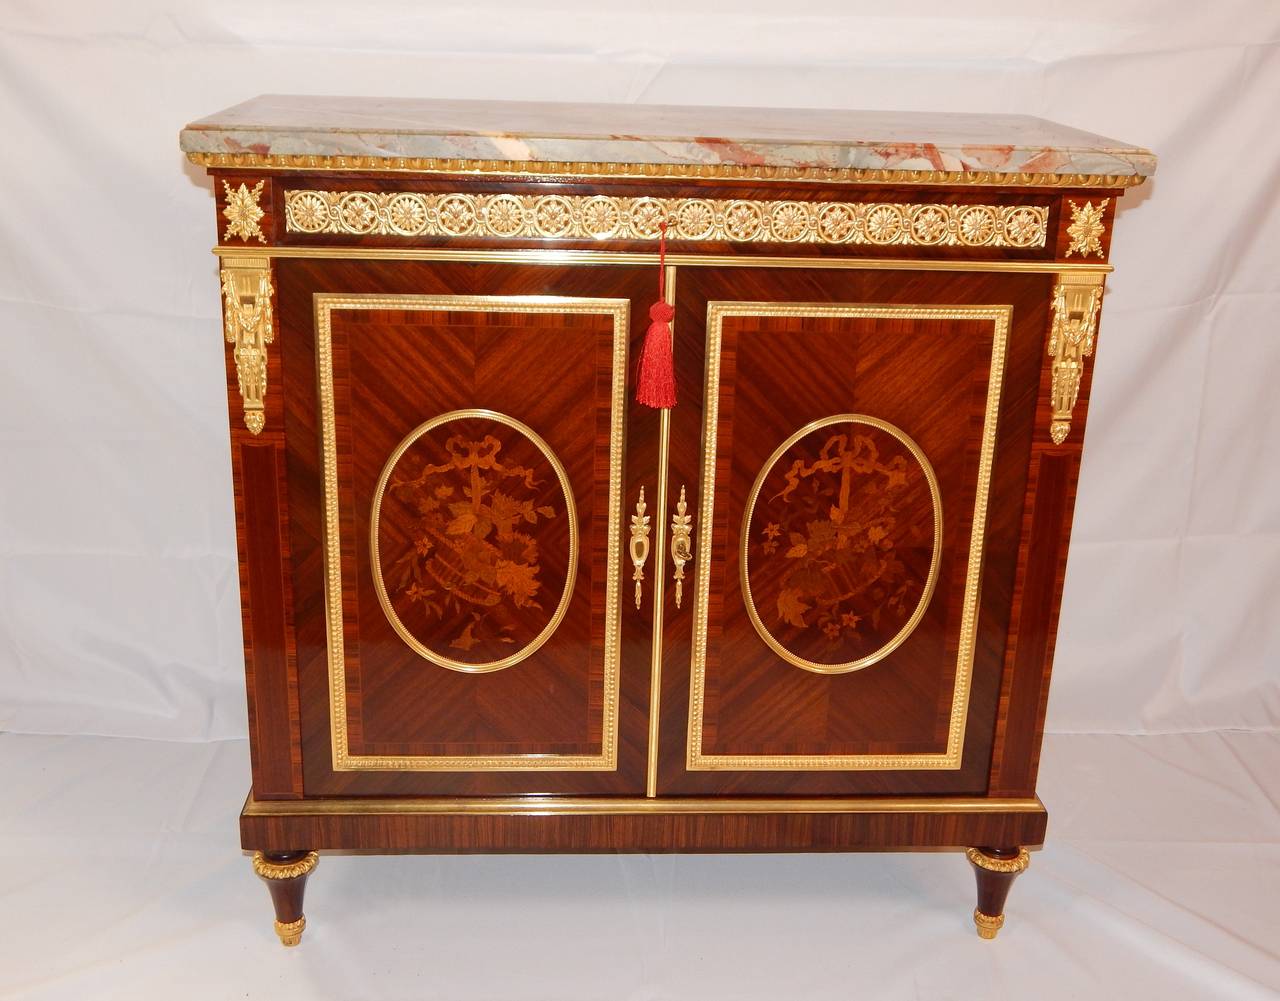 A fine quality bronze mounted marquetry inlaid cabinet, or commode, having two doors, with one drawer above, along with interior drawers. Both the bronze mounts, and the marquetry are of the finest quality, as would be expected from this highly